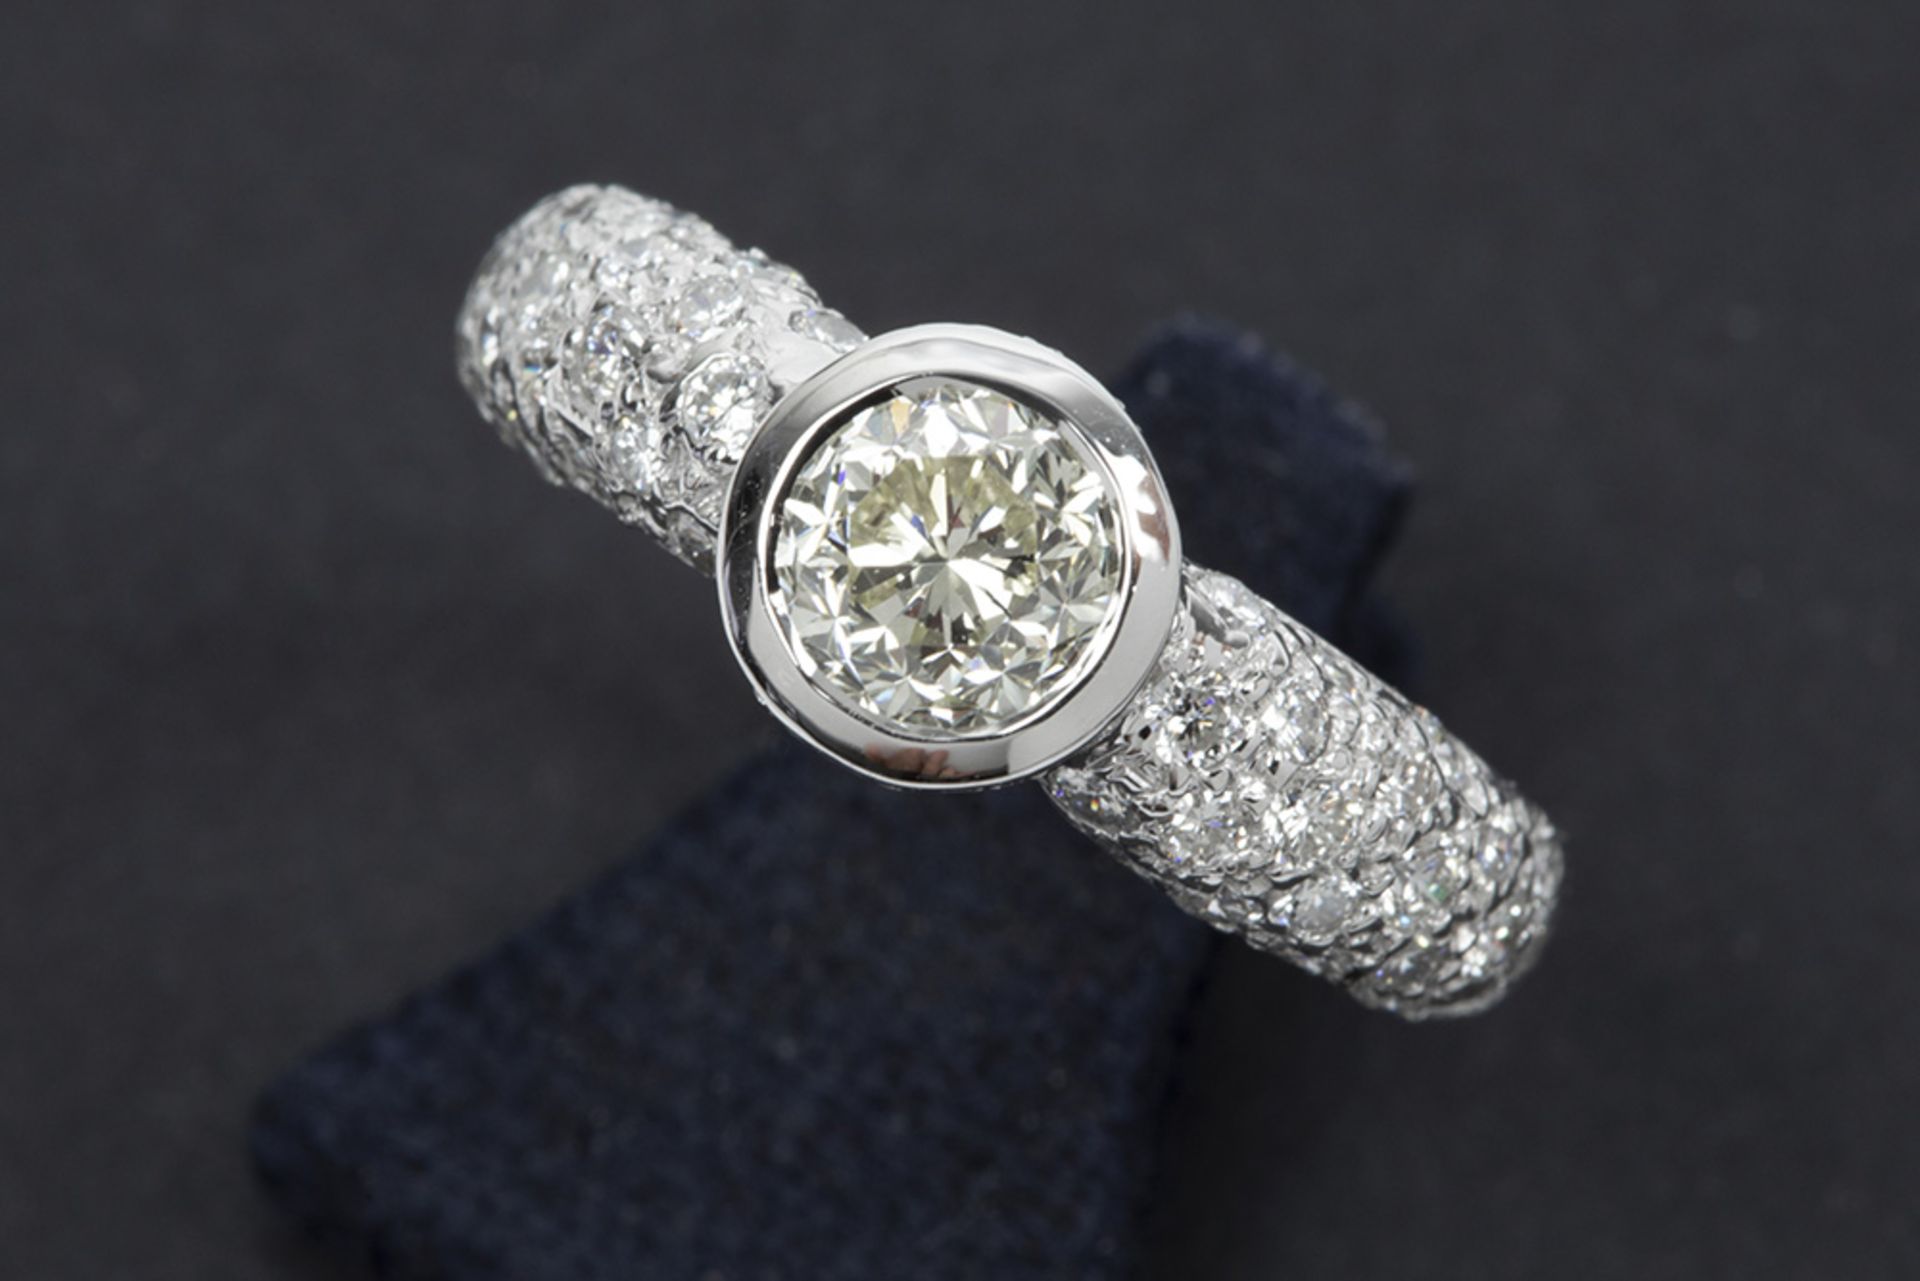 a 1 carat quality brilliant cut diamond set in a ring in white gold (18 carat) with ca 0,70 carat of